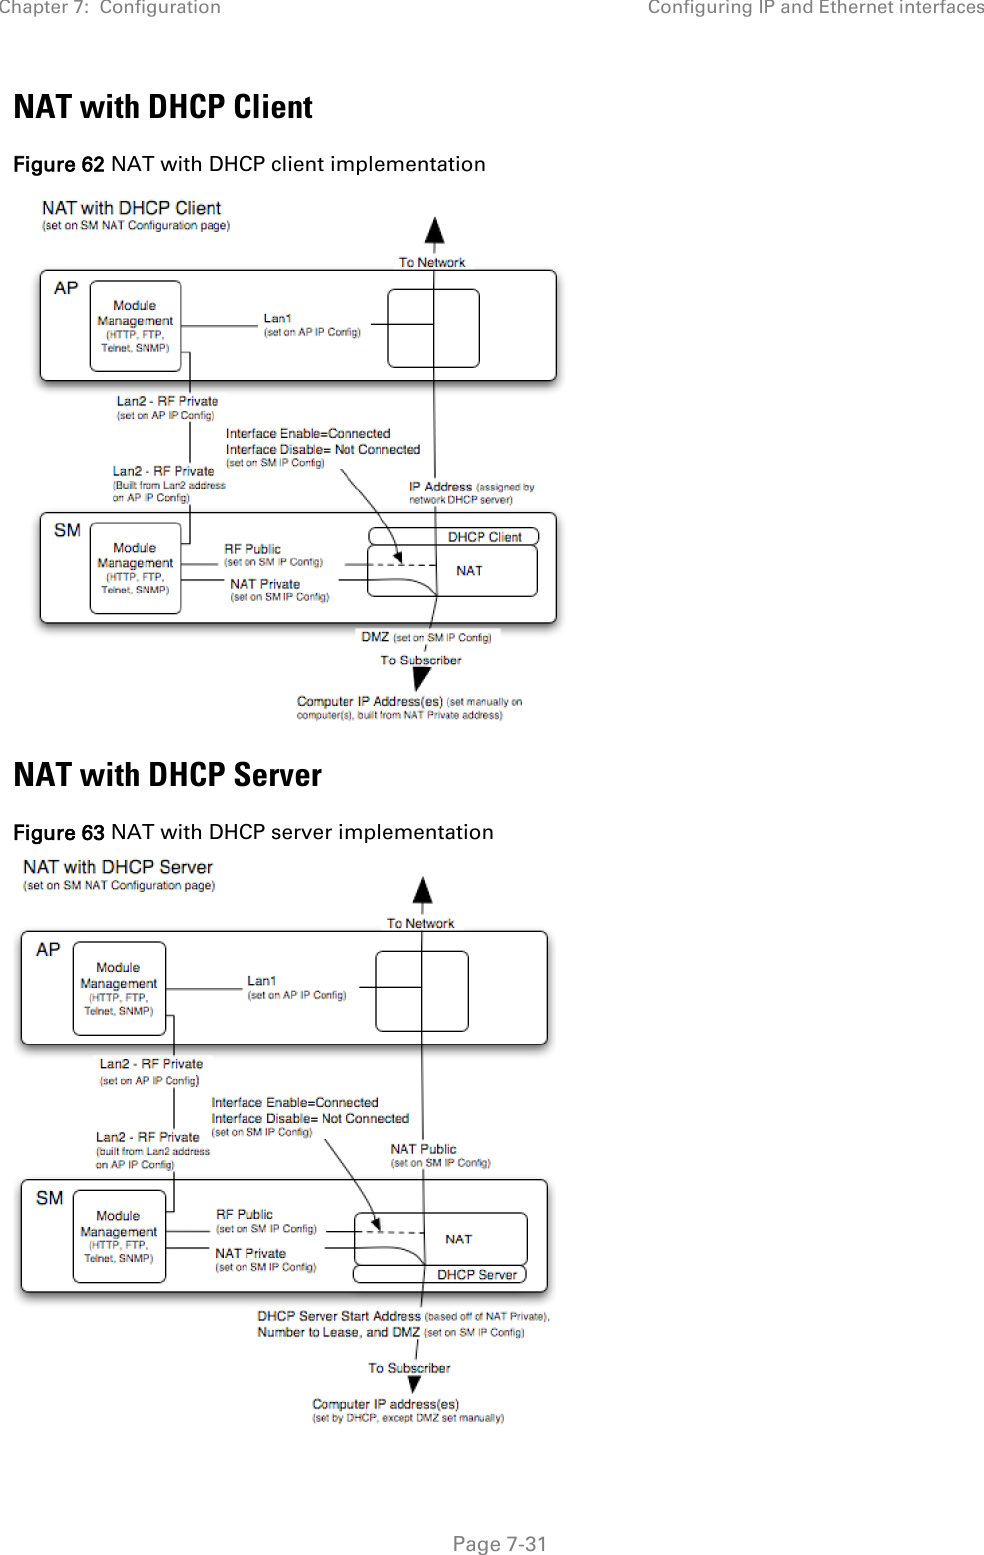 Chapter 7:  Configuration Configuring IP and Ethernet interfaces   Page 7-31 NAT with DHCP Client Figure 62 NAT with DHCP client implementation  NAT with DHCP Server Figure 63 NAT with DHCP server implementation  